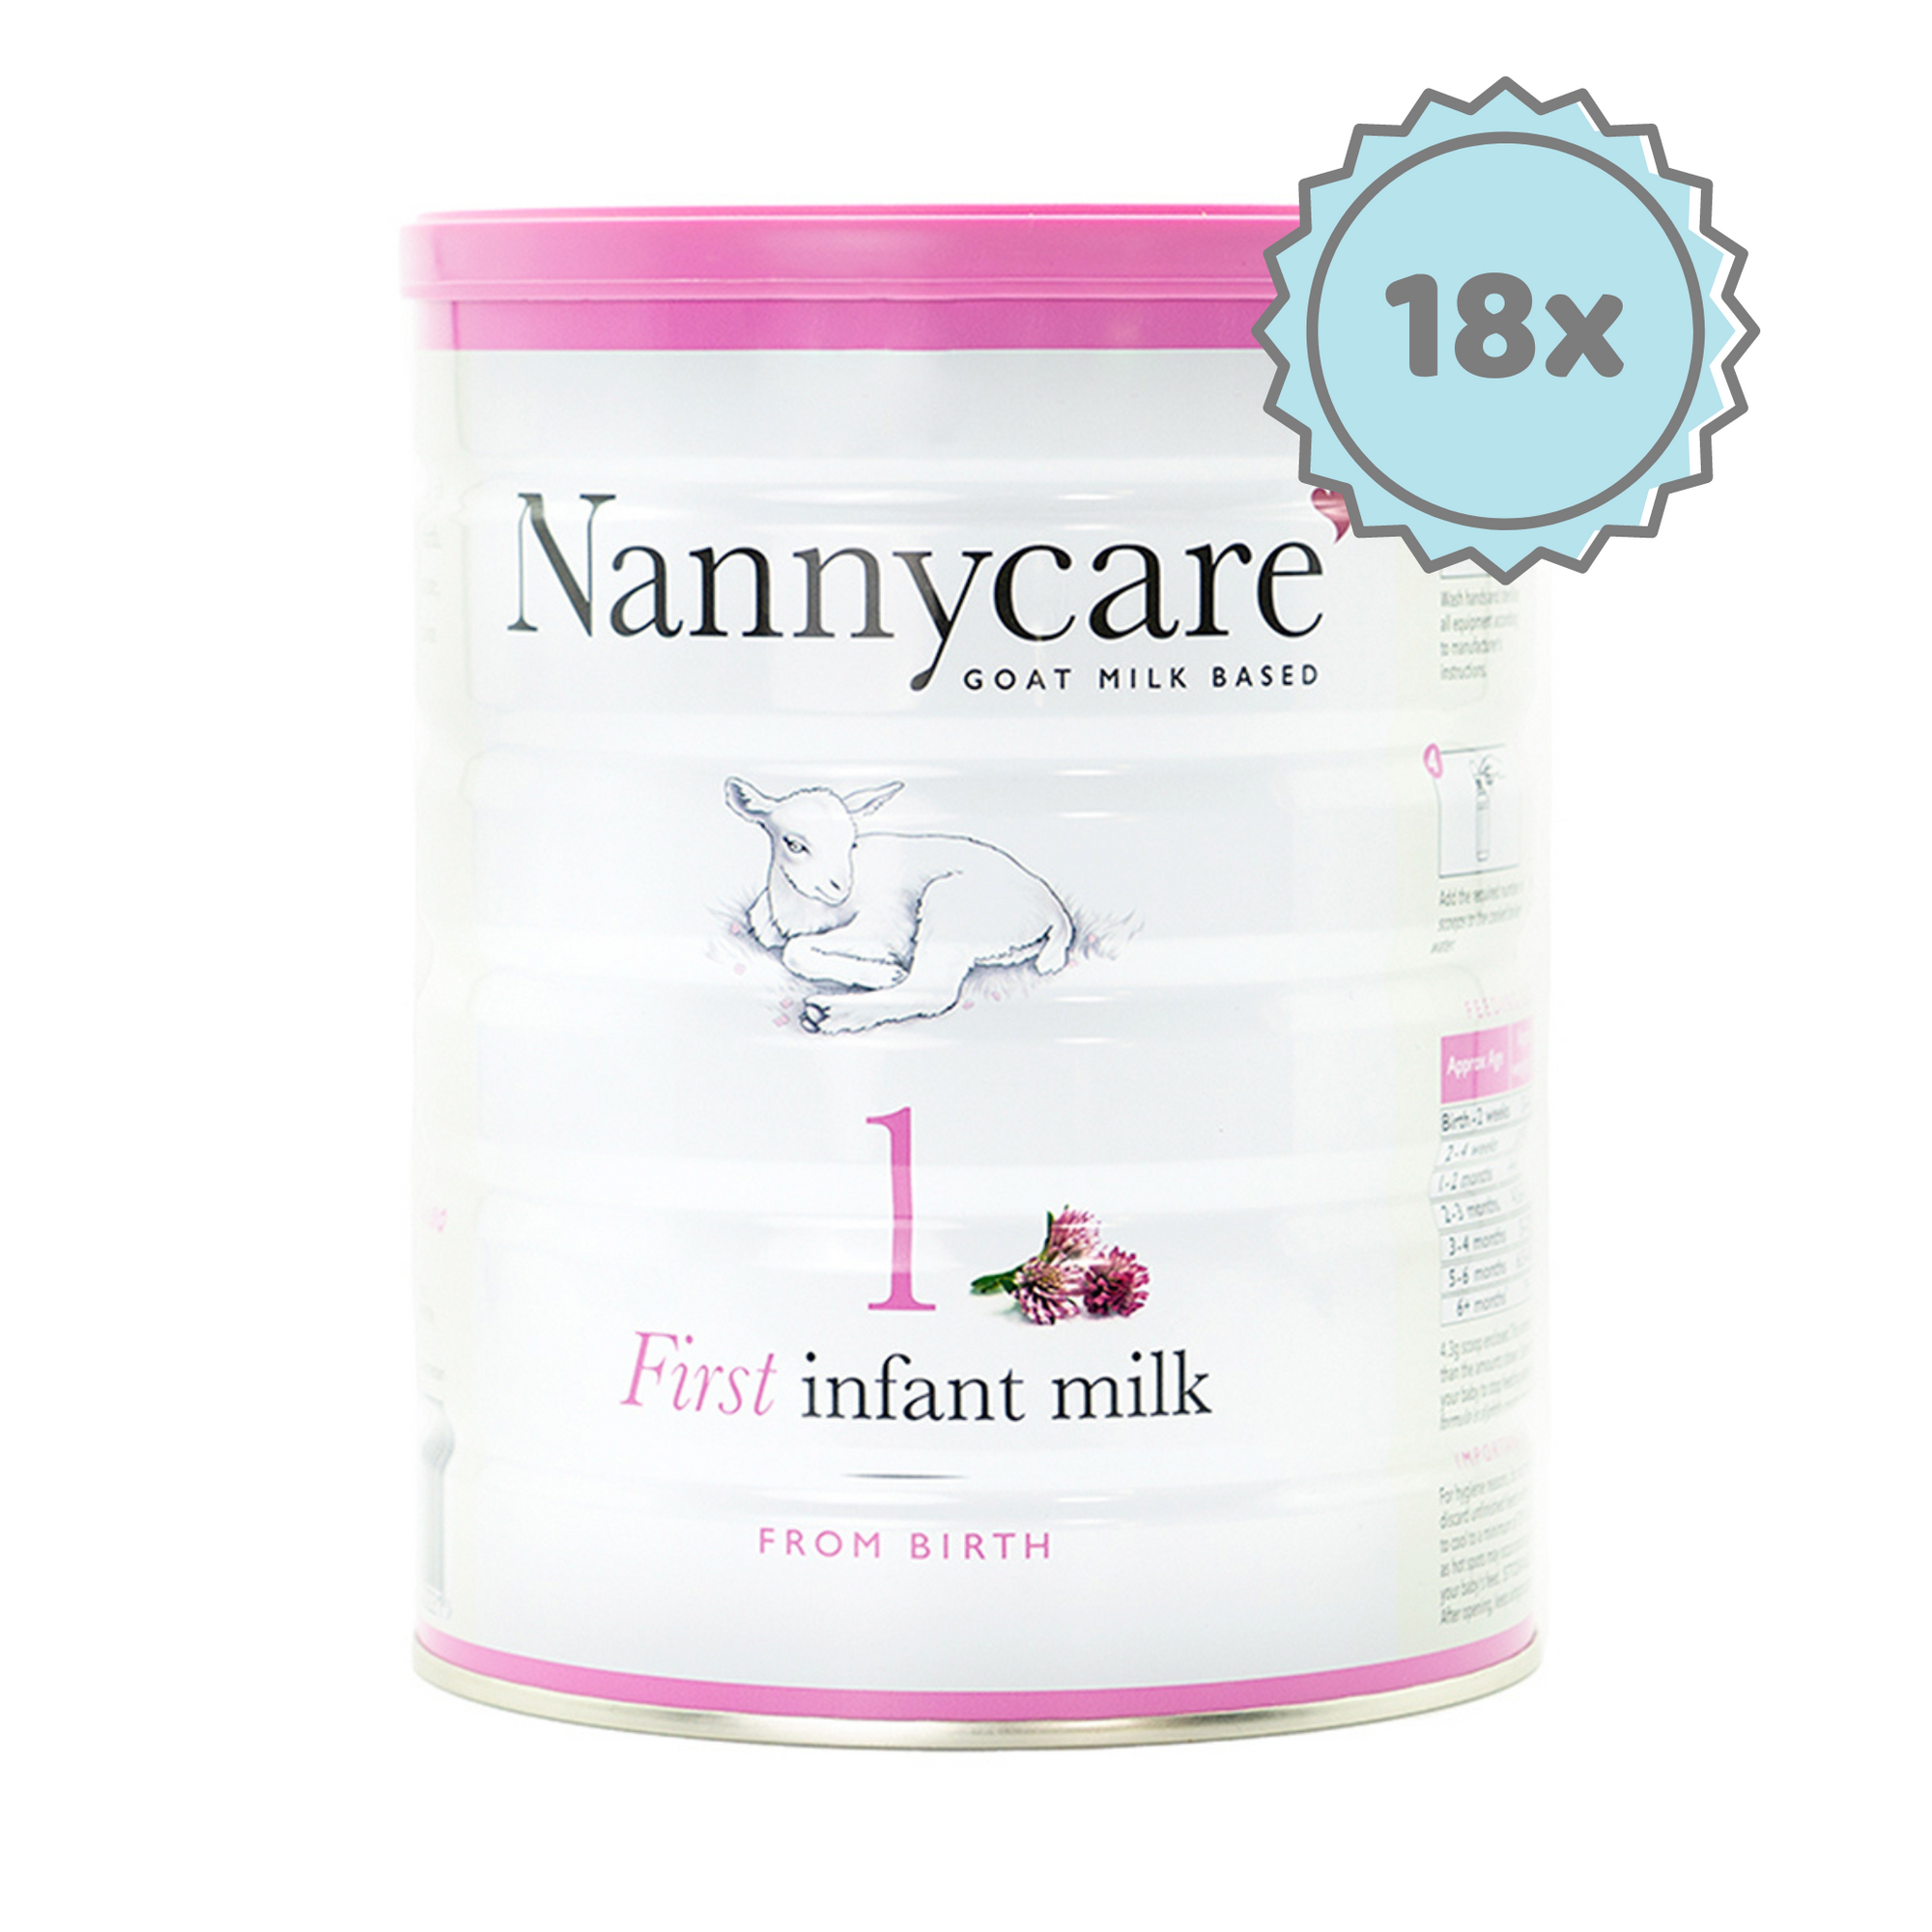 Nannycare Stage 1 | Organic European Baby Formula - 18 cans